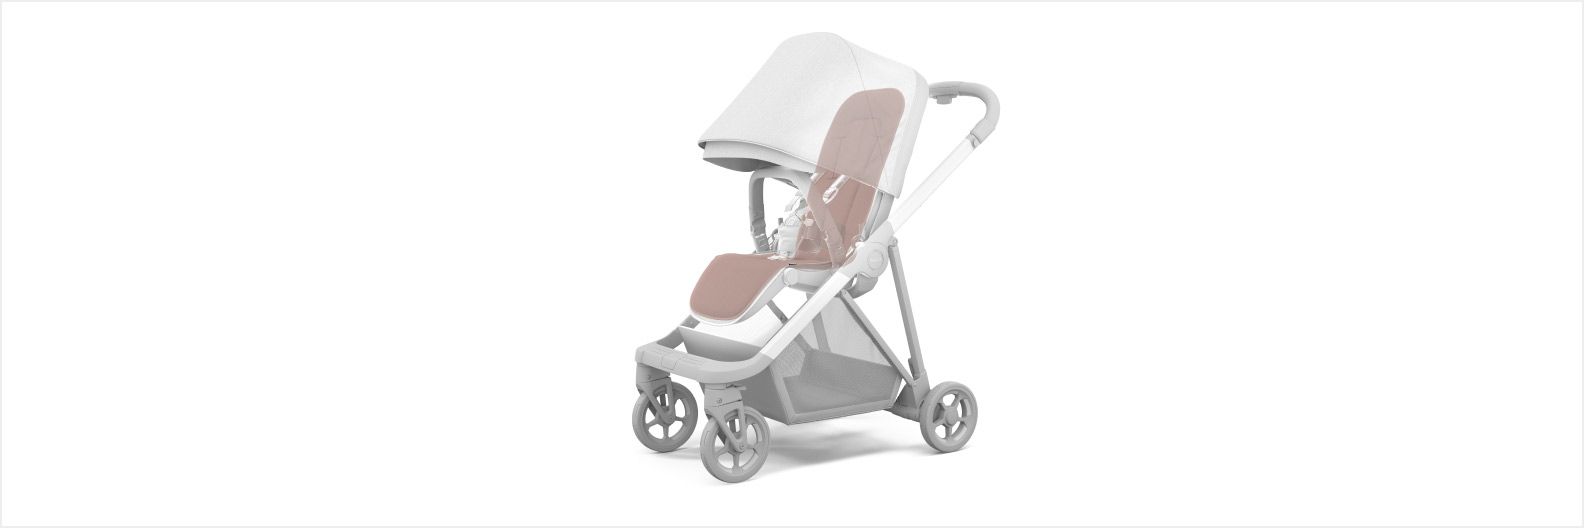 A 3D rendition of the Thule Seat Liner for the Thule Shine stroller with a white background.